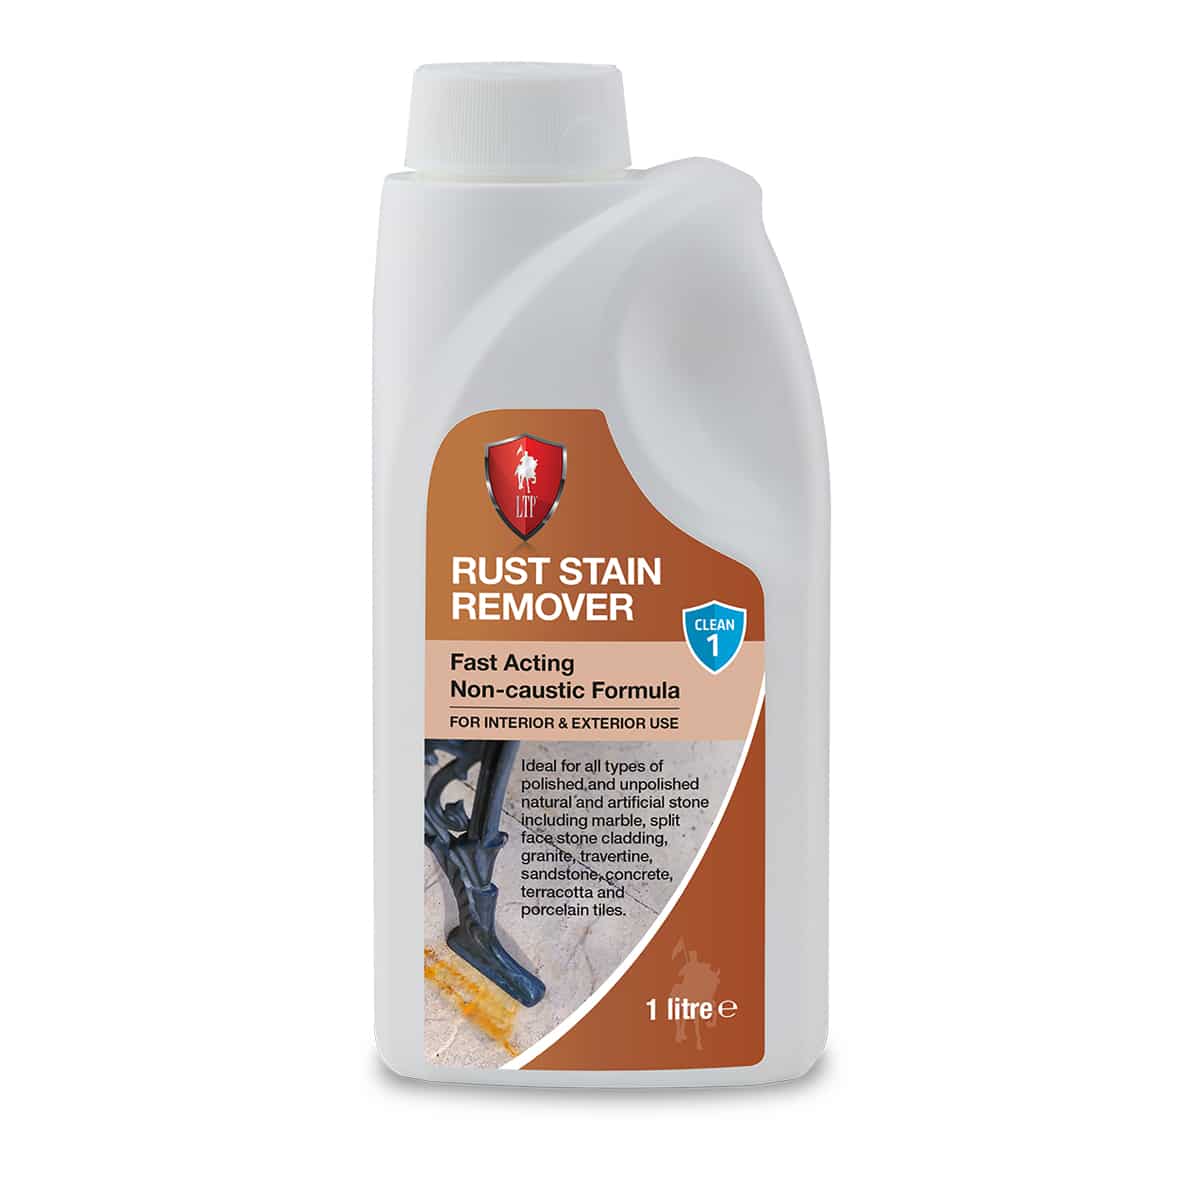 Clean a rust stain фото 103